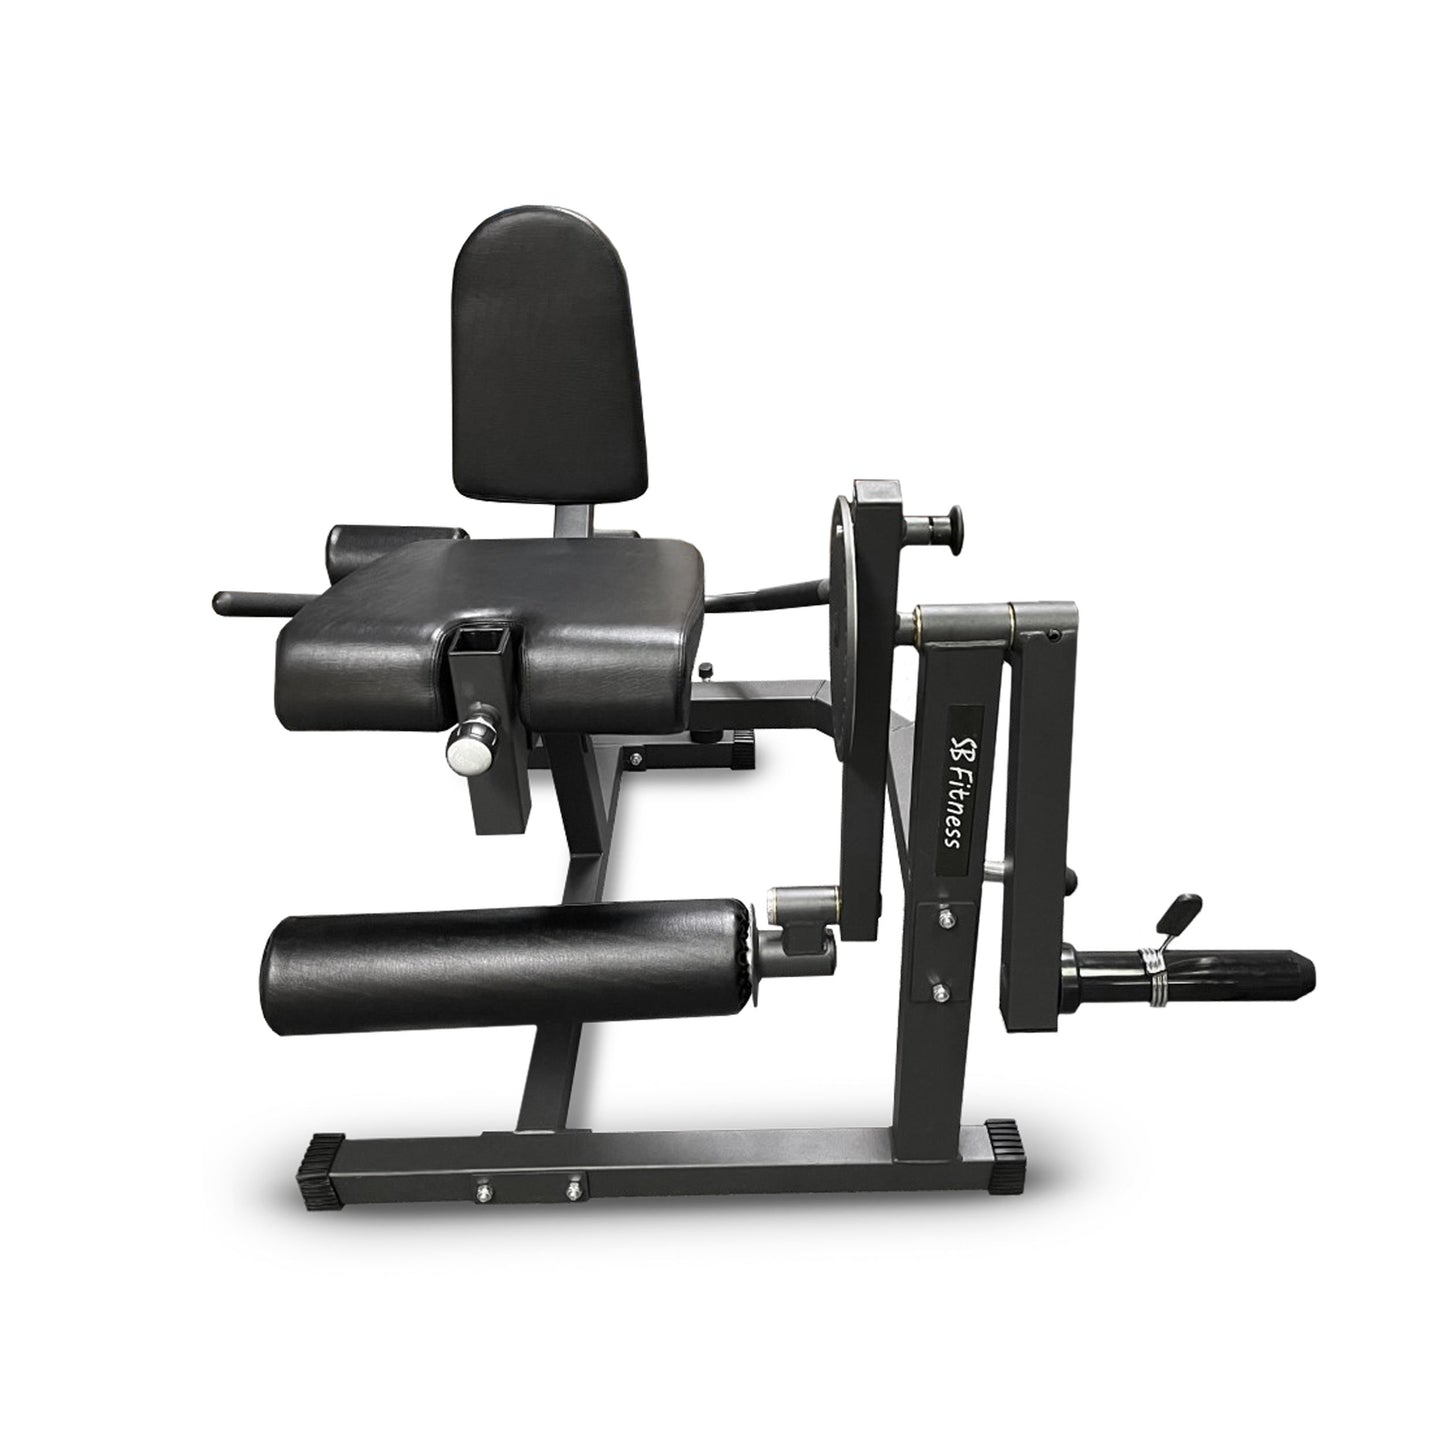 SB Fitness LELC700 Commercial Seated Leg Extension/Leg Curl Combo